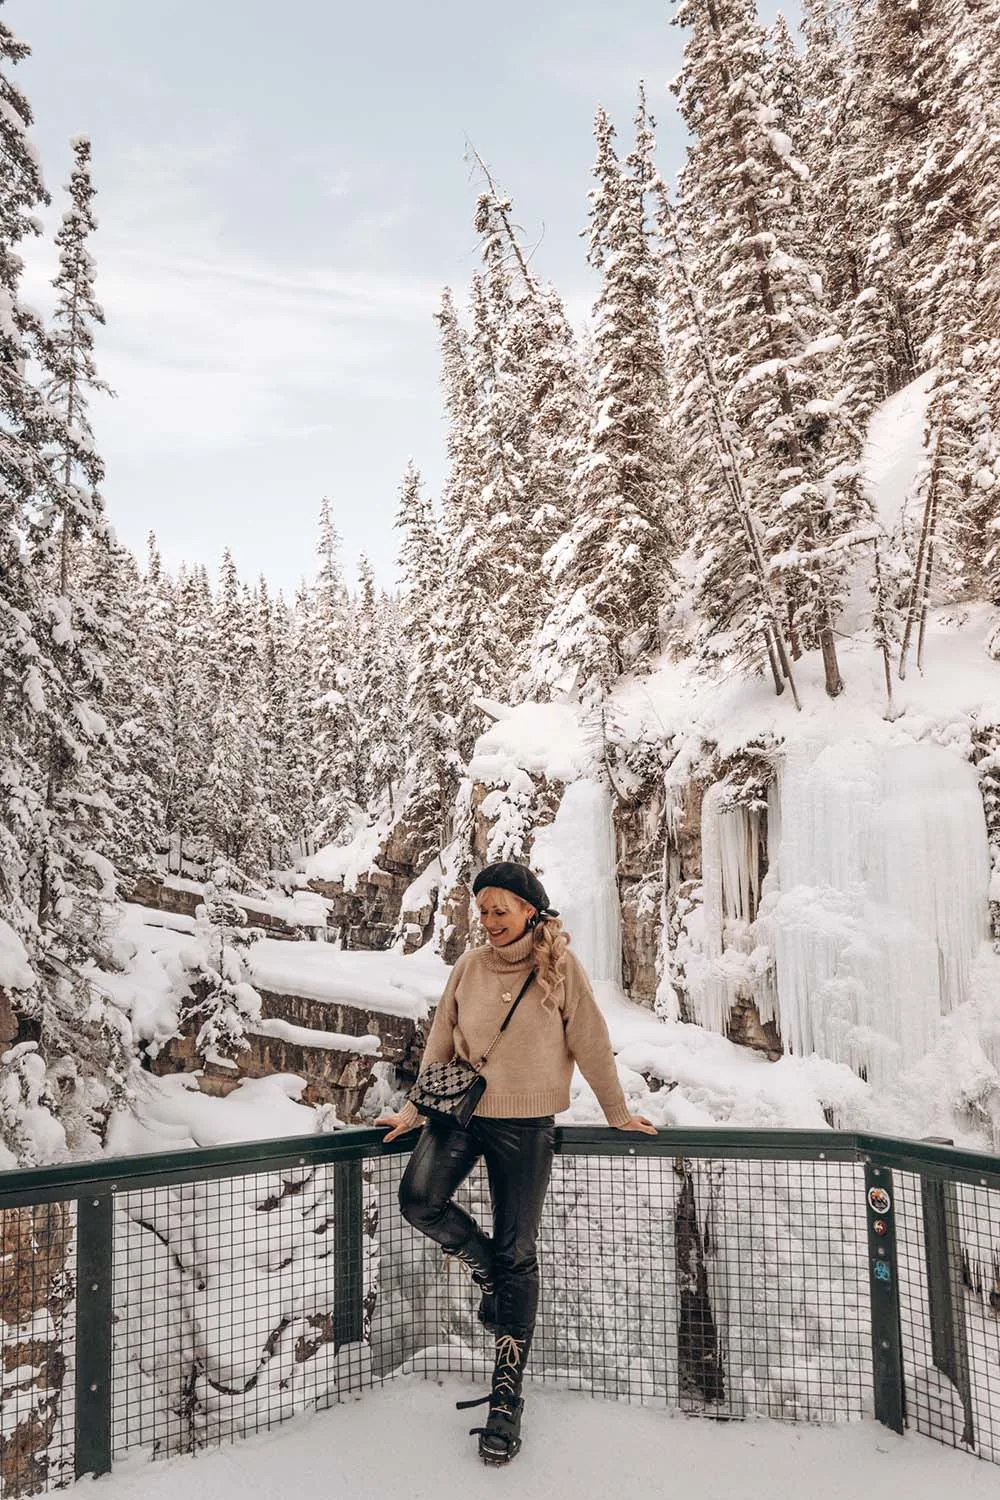 Banff is absolutely incredible. Although most people visit Banff when the weather is warmer, it's absolutely magical to visit in winter. Here's a local's guide to some of the best things to do in in Banff in winter. From hikes and trails to winter sports, family friendly excursions, dining experiences and more. You won't want to miss this guide that will surely convince you to add Banff in winter to your travel bucket list. Pictured here: Johnston Canyon upper falls trail